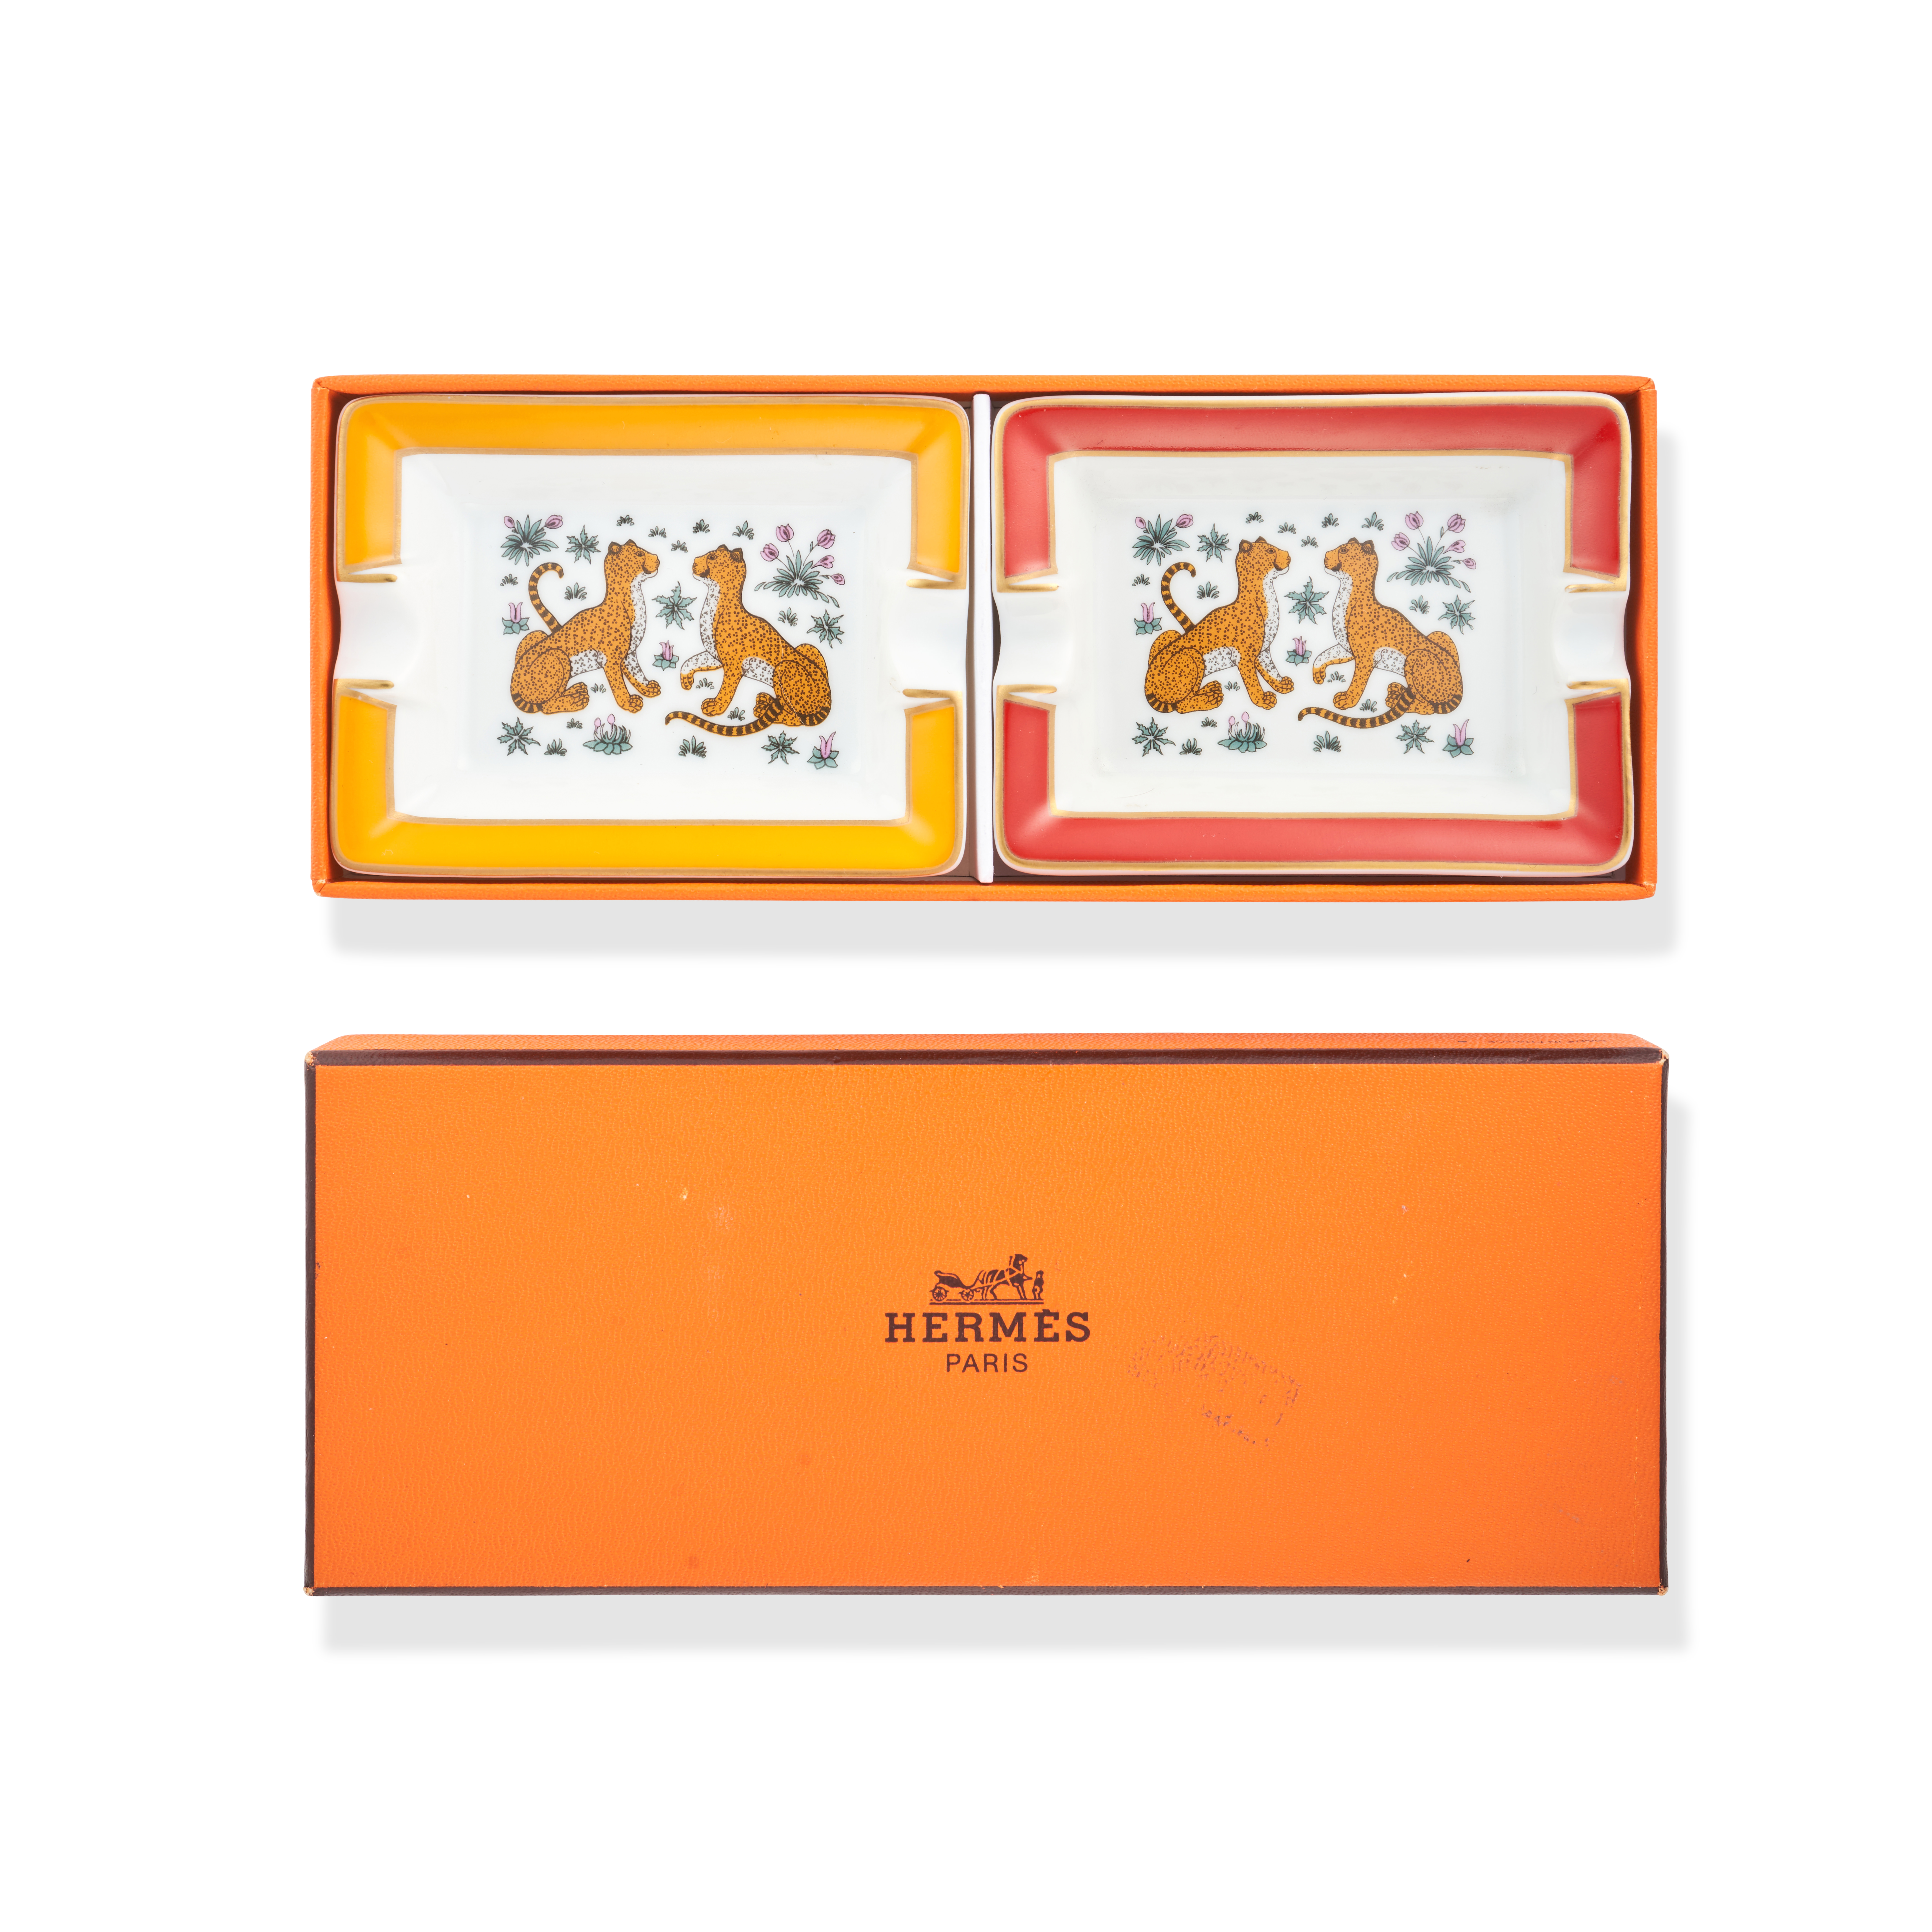 HERMÈS, A SET OF TWO MINI ASHTRAYS in porcelain with velvet goatskin base featuring screen-printe... - Image 2 of 3